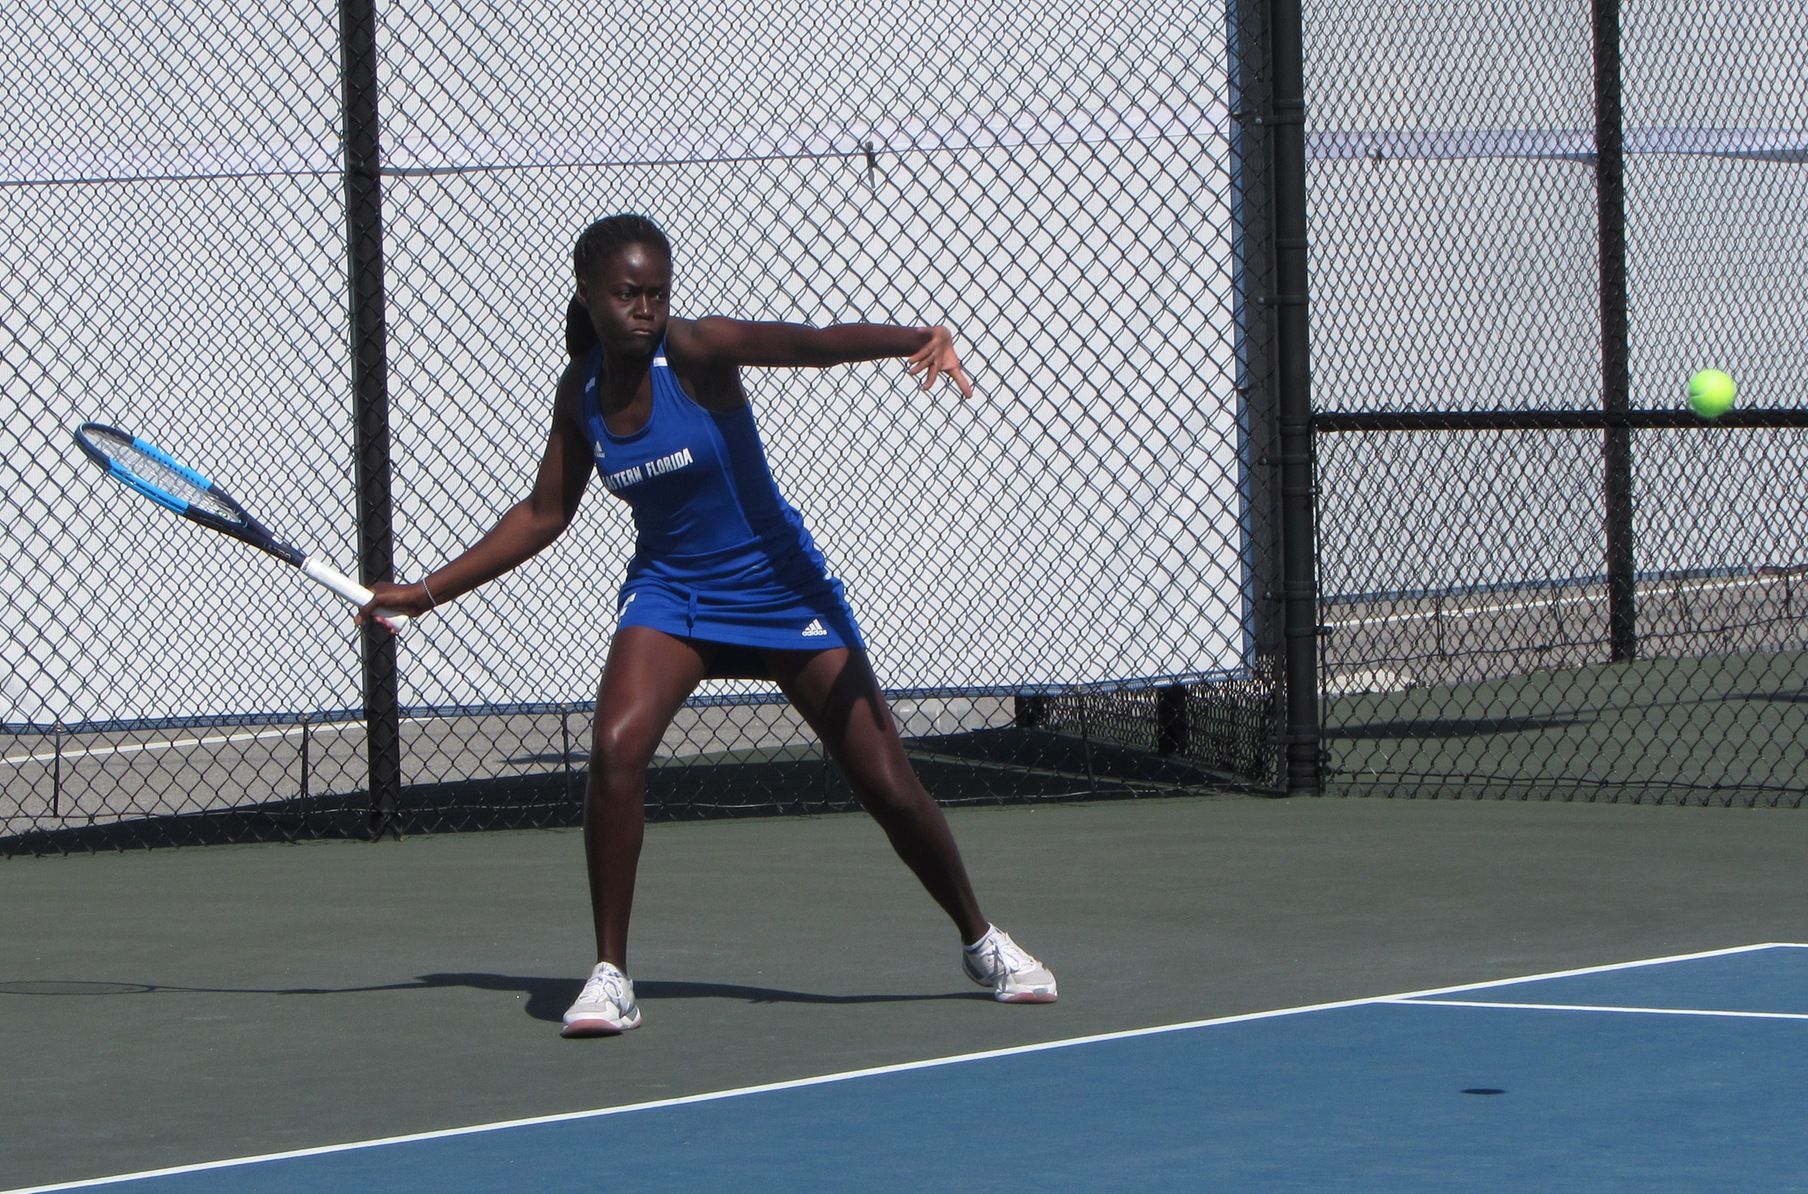 Women's tennis team picks up win against Southern Indiana